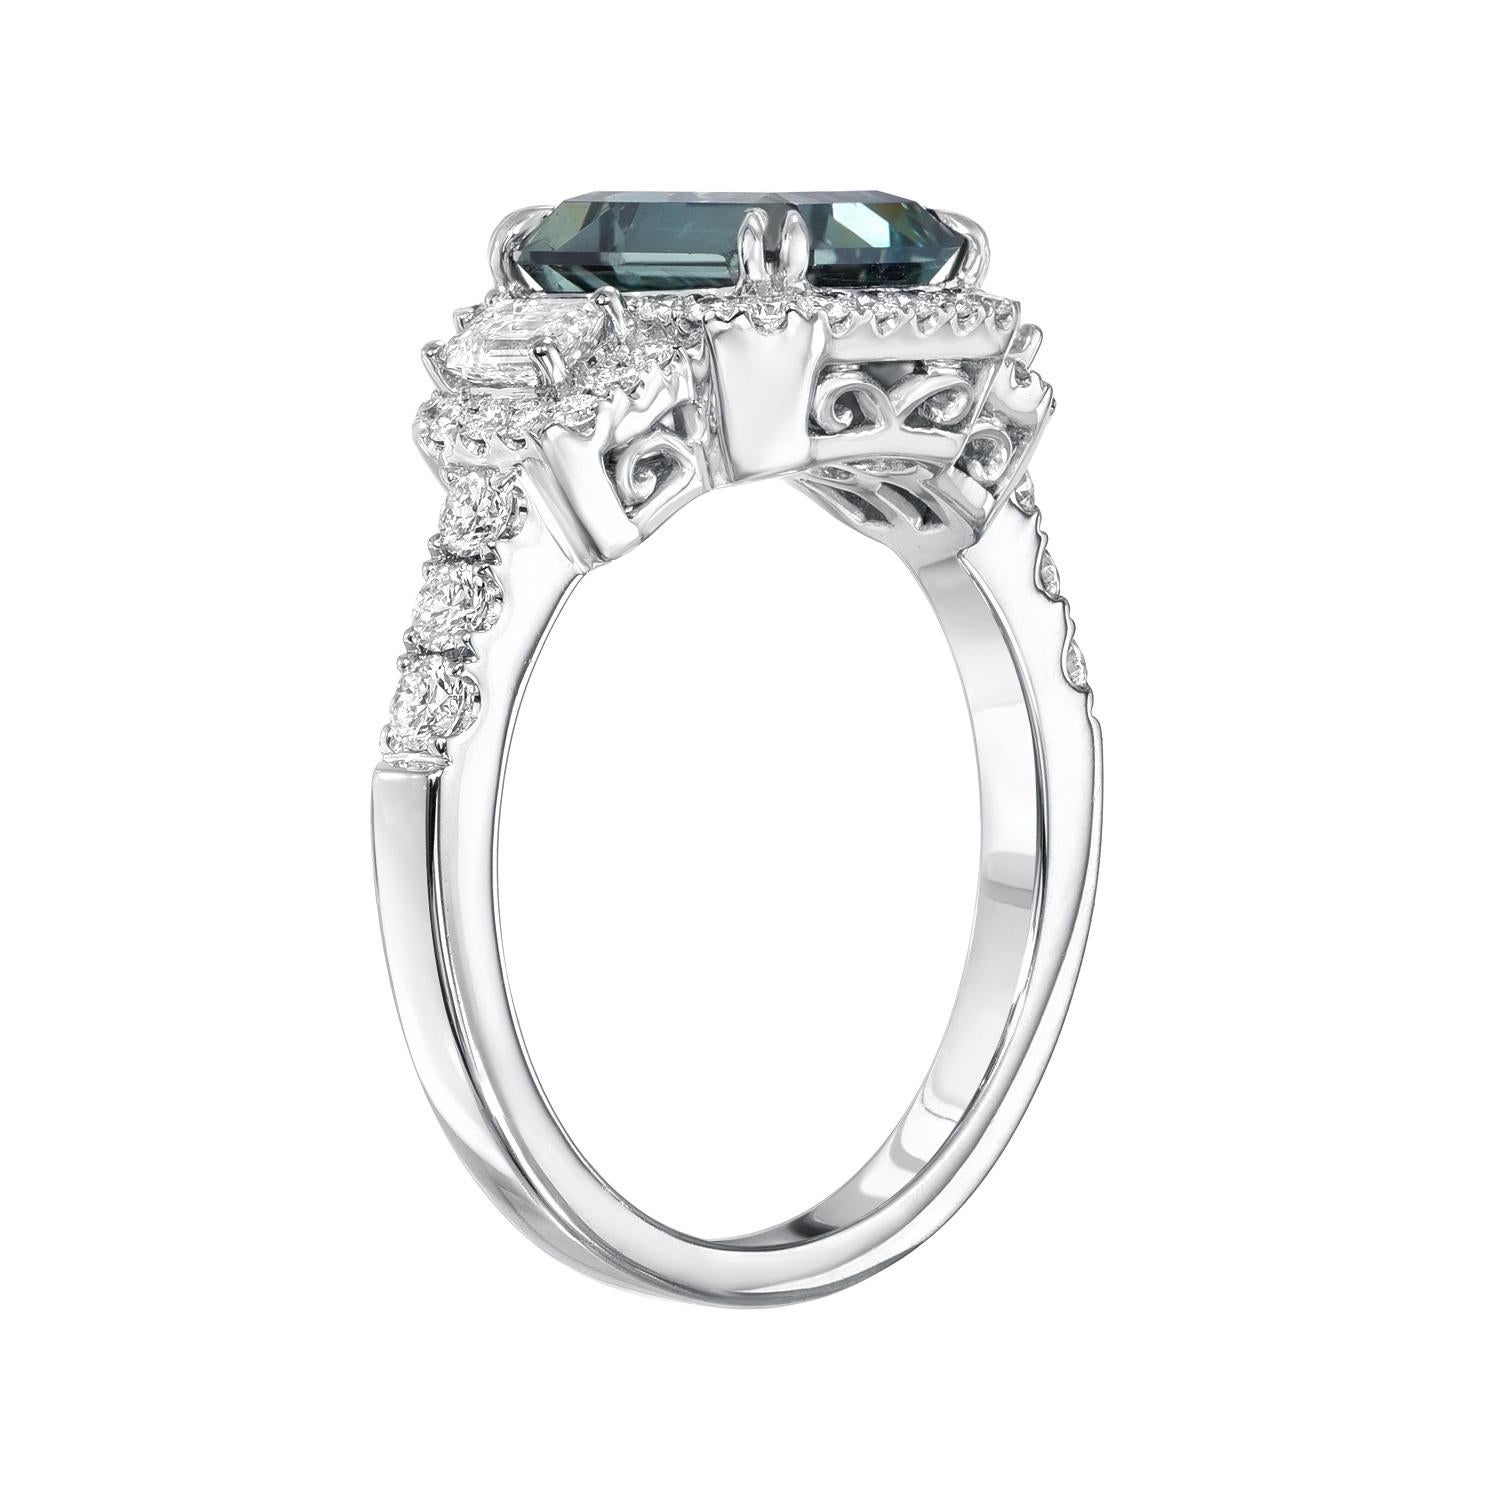 Special 2.92 carat Teal Sapphire emerald-cut, 18K white gold ring, flanked by a pair of emerald-cut diamonds and round brilliant diamonds weighing a total of 0.77 carats. 
Ring size 6.5. Resizing is complementary upon request.
Crafted by extremely